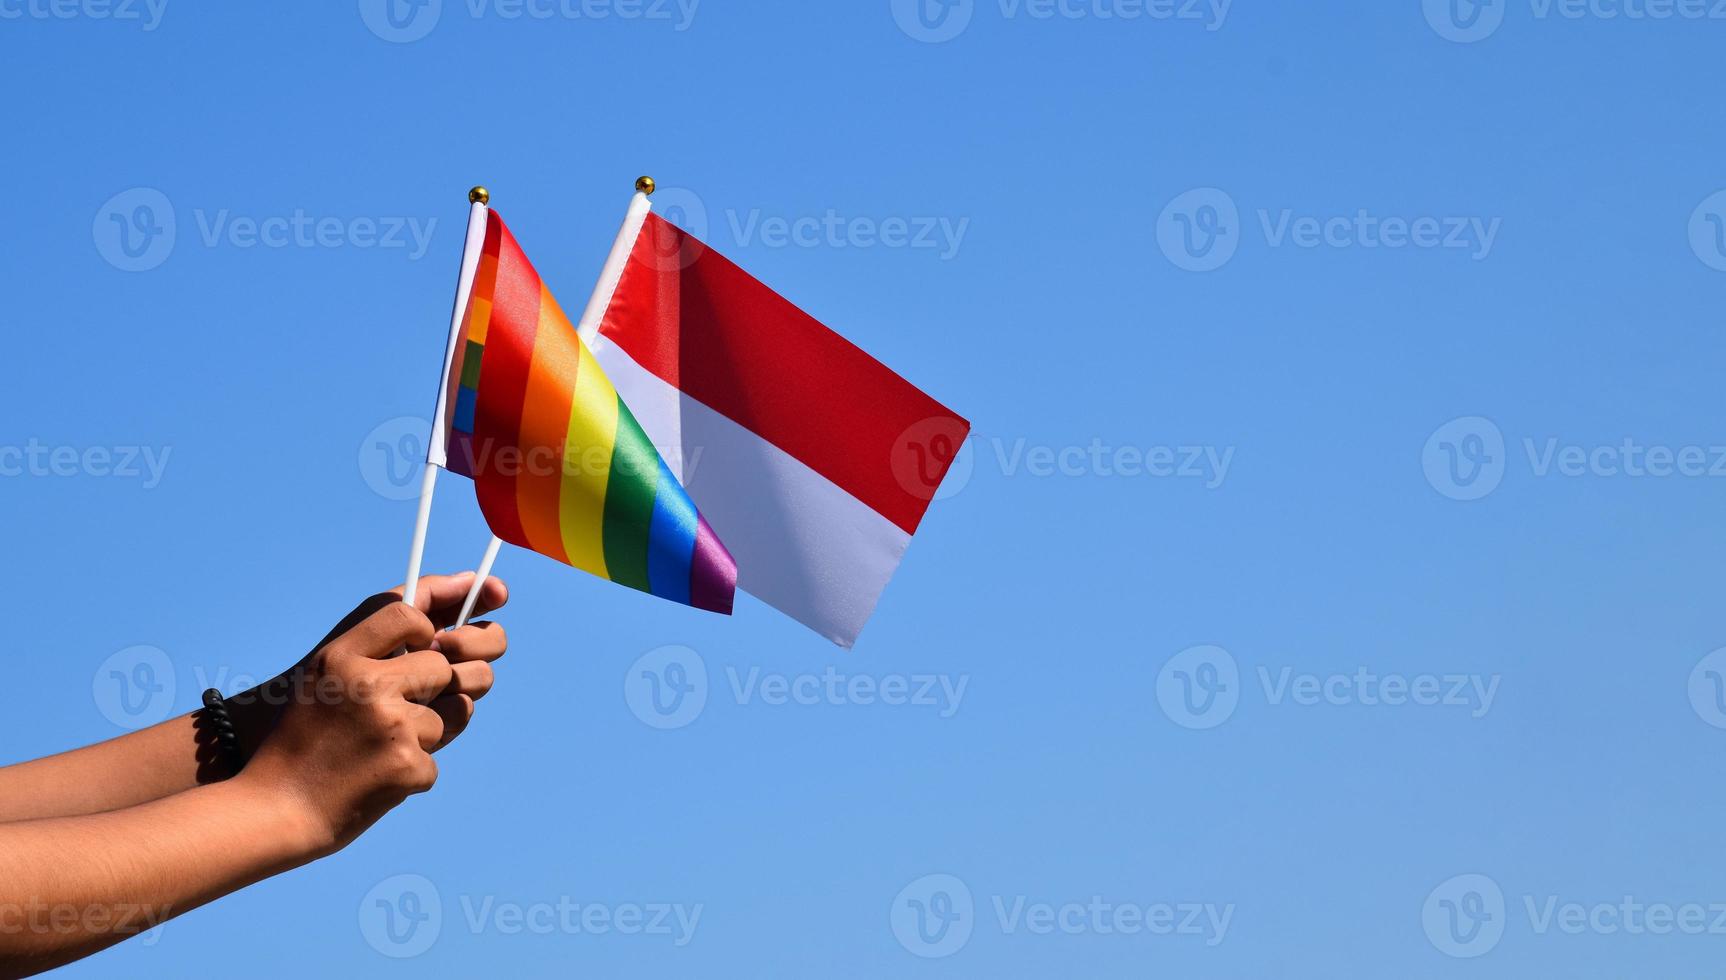 Indonesia flag and rainbow flag, LGBT symbol, holding in hands, bluesky background, concept for LGBT celebration in Indonesia and around the world in pride month, June, soft and selective focus. photo